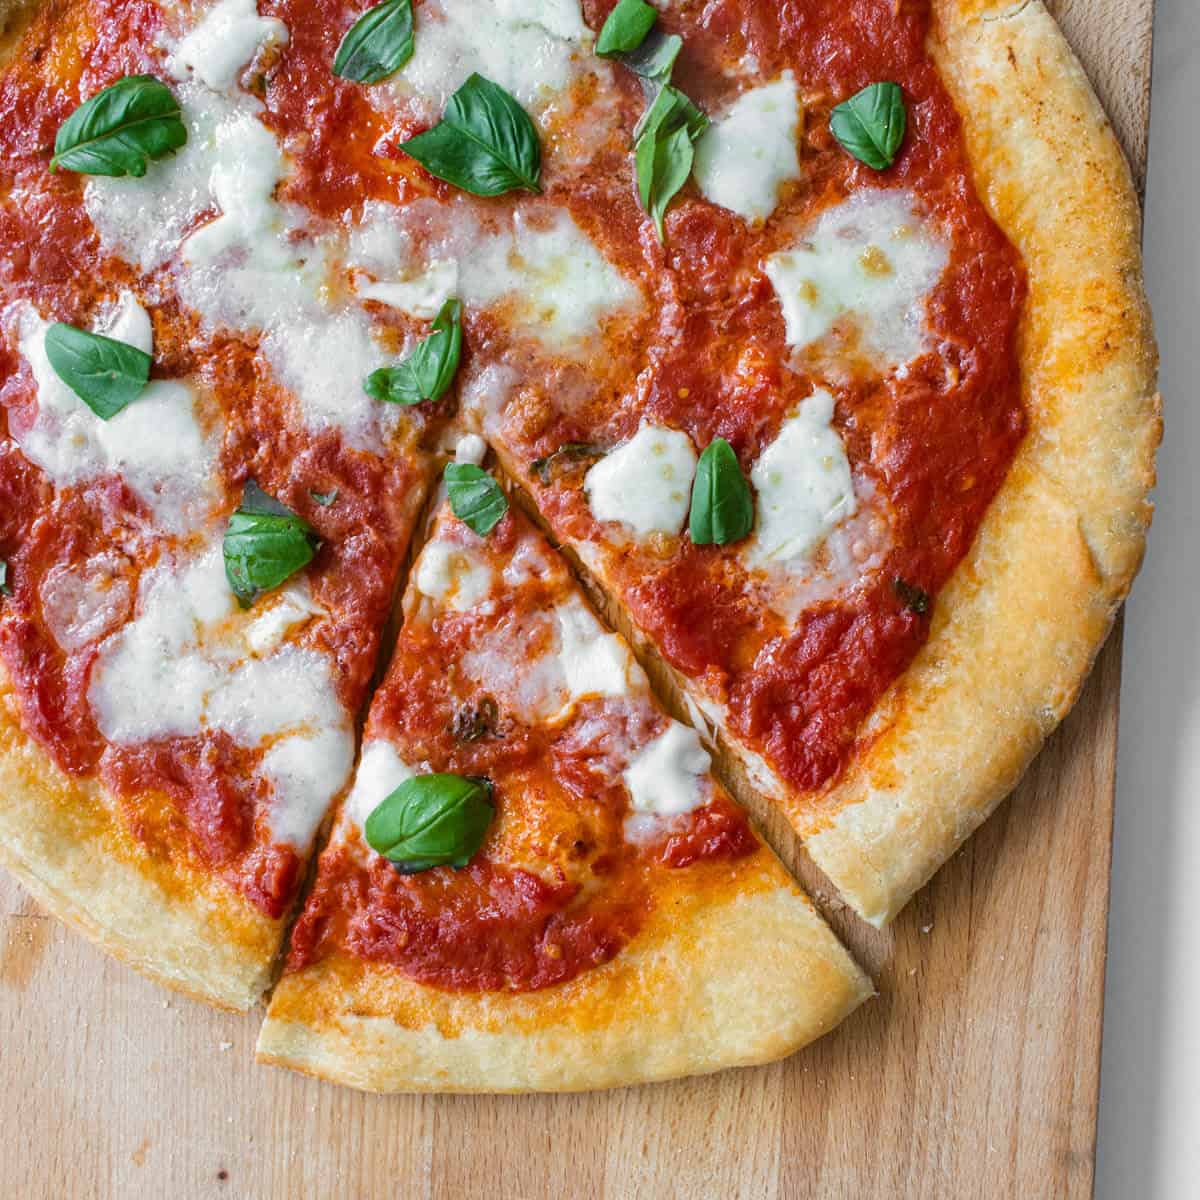 https://cookingwithayeh.com/wp-content/uploads/2021/08/Italian-Pizza.jpg